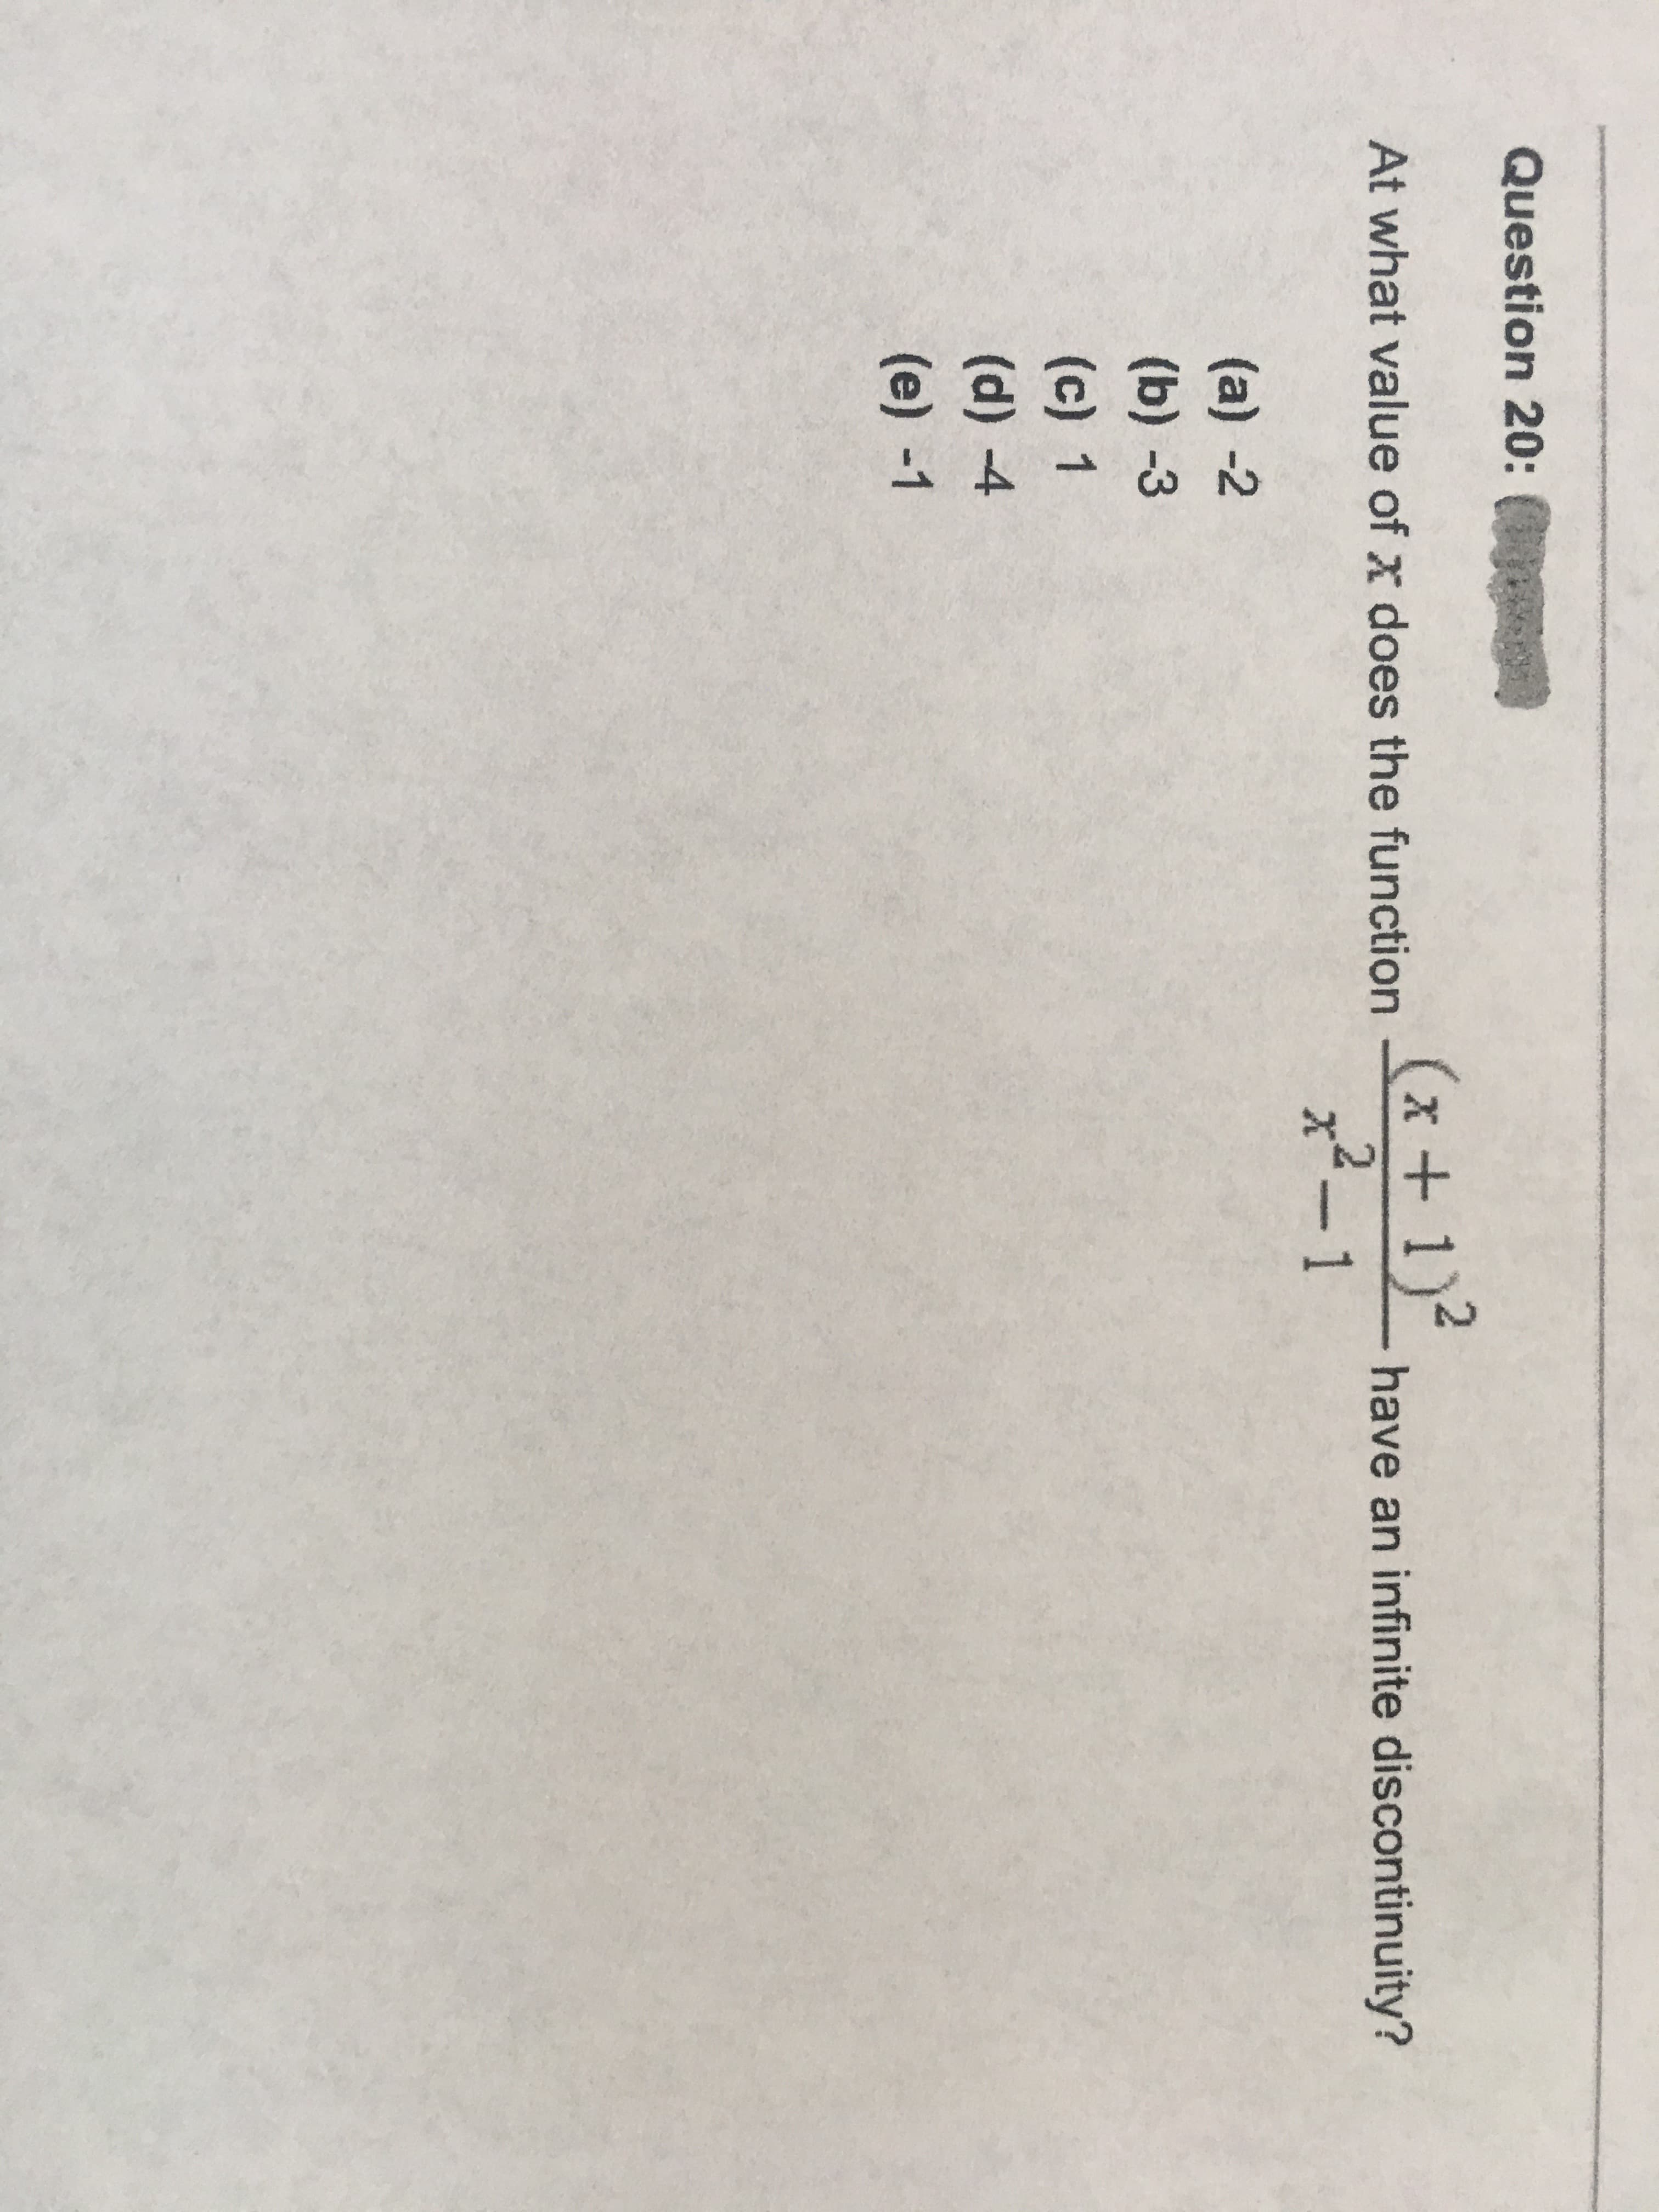 (x+1)2
ス3-1
At what value of x does the function
have an infinite discontinuity?
